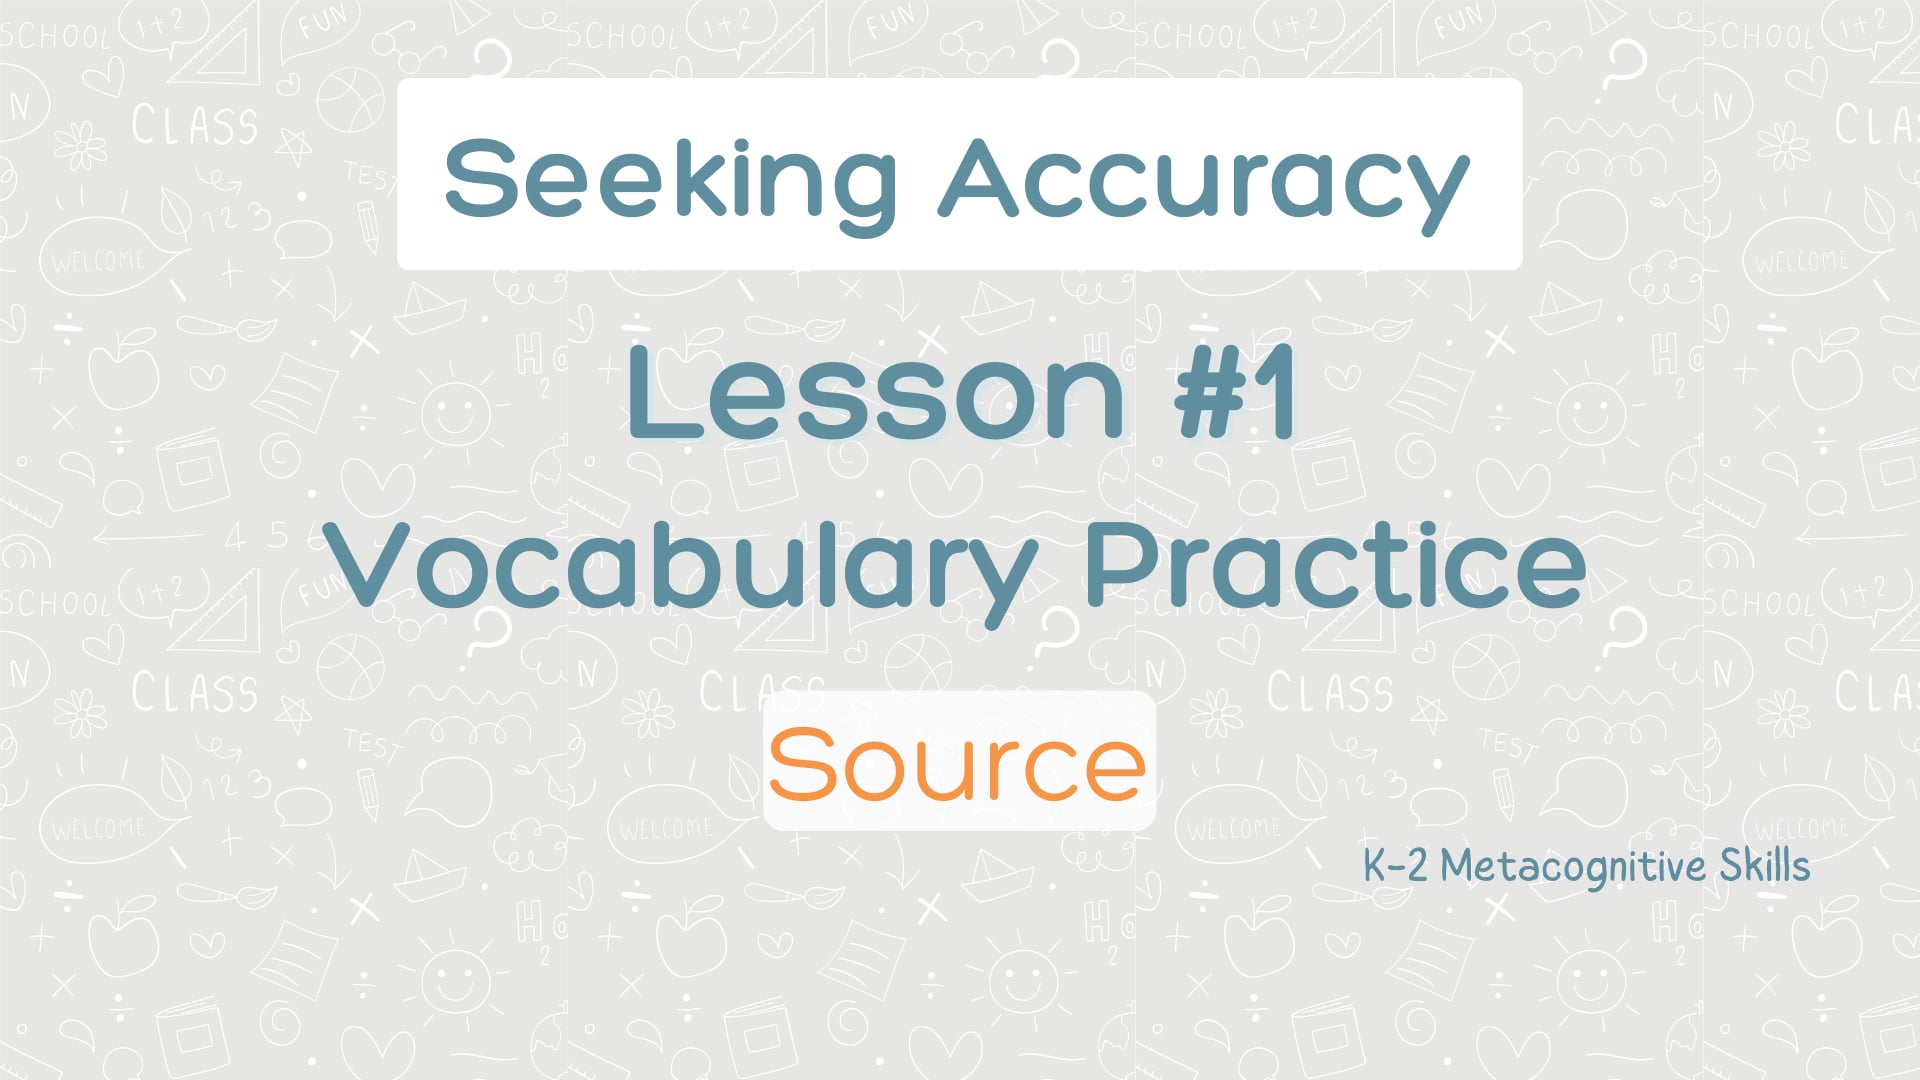 Lesson #1 Vocabulary Practice: Source video thumbnail